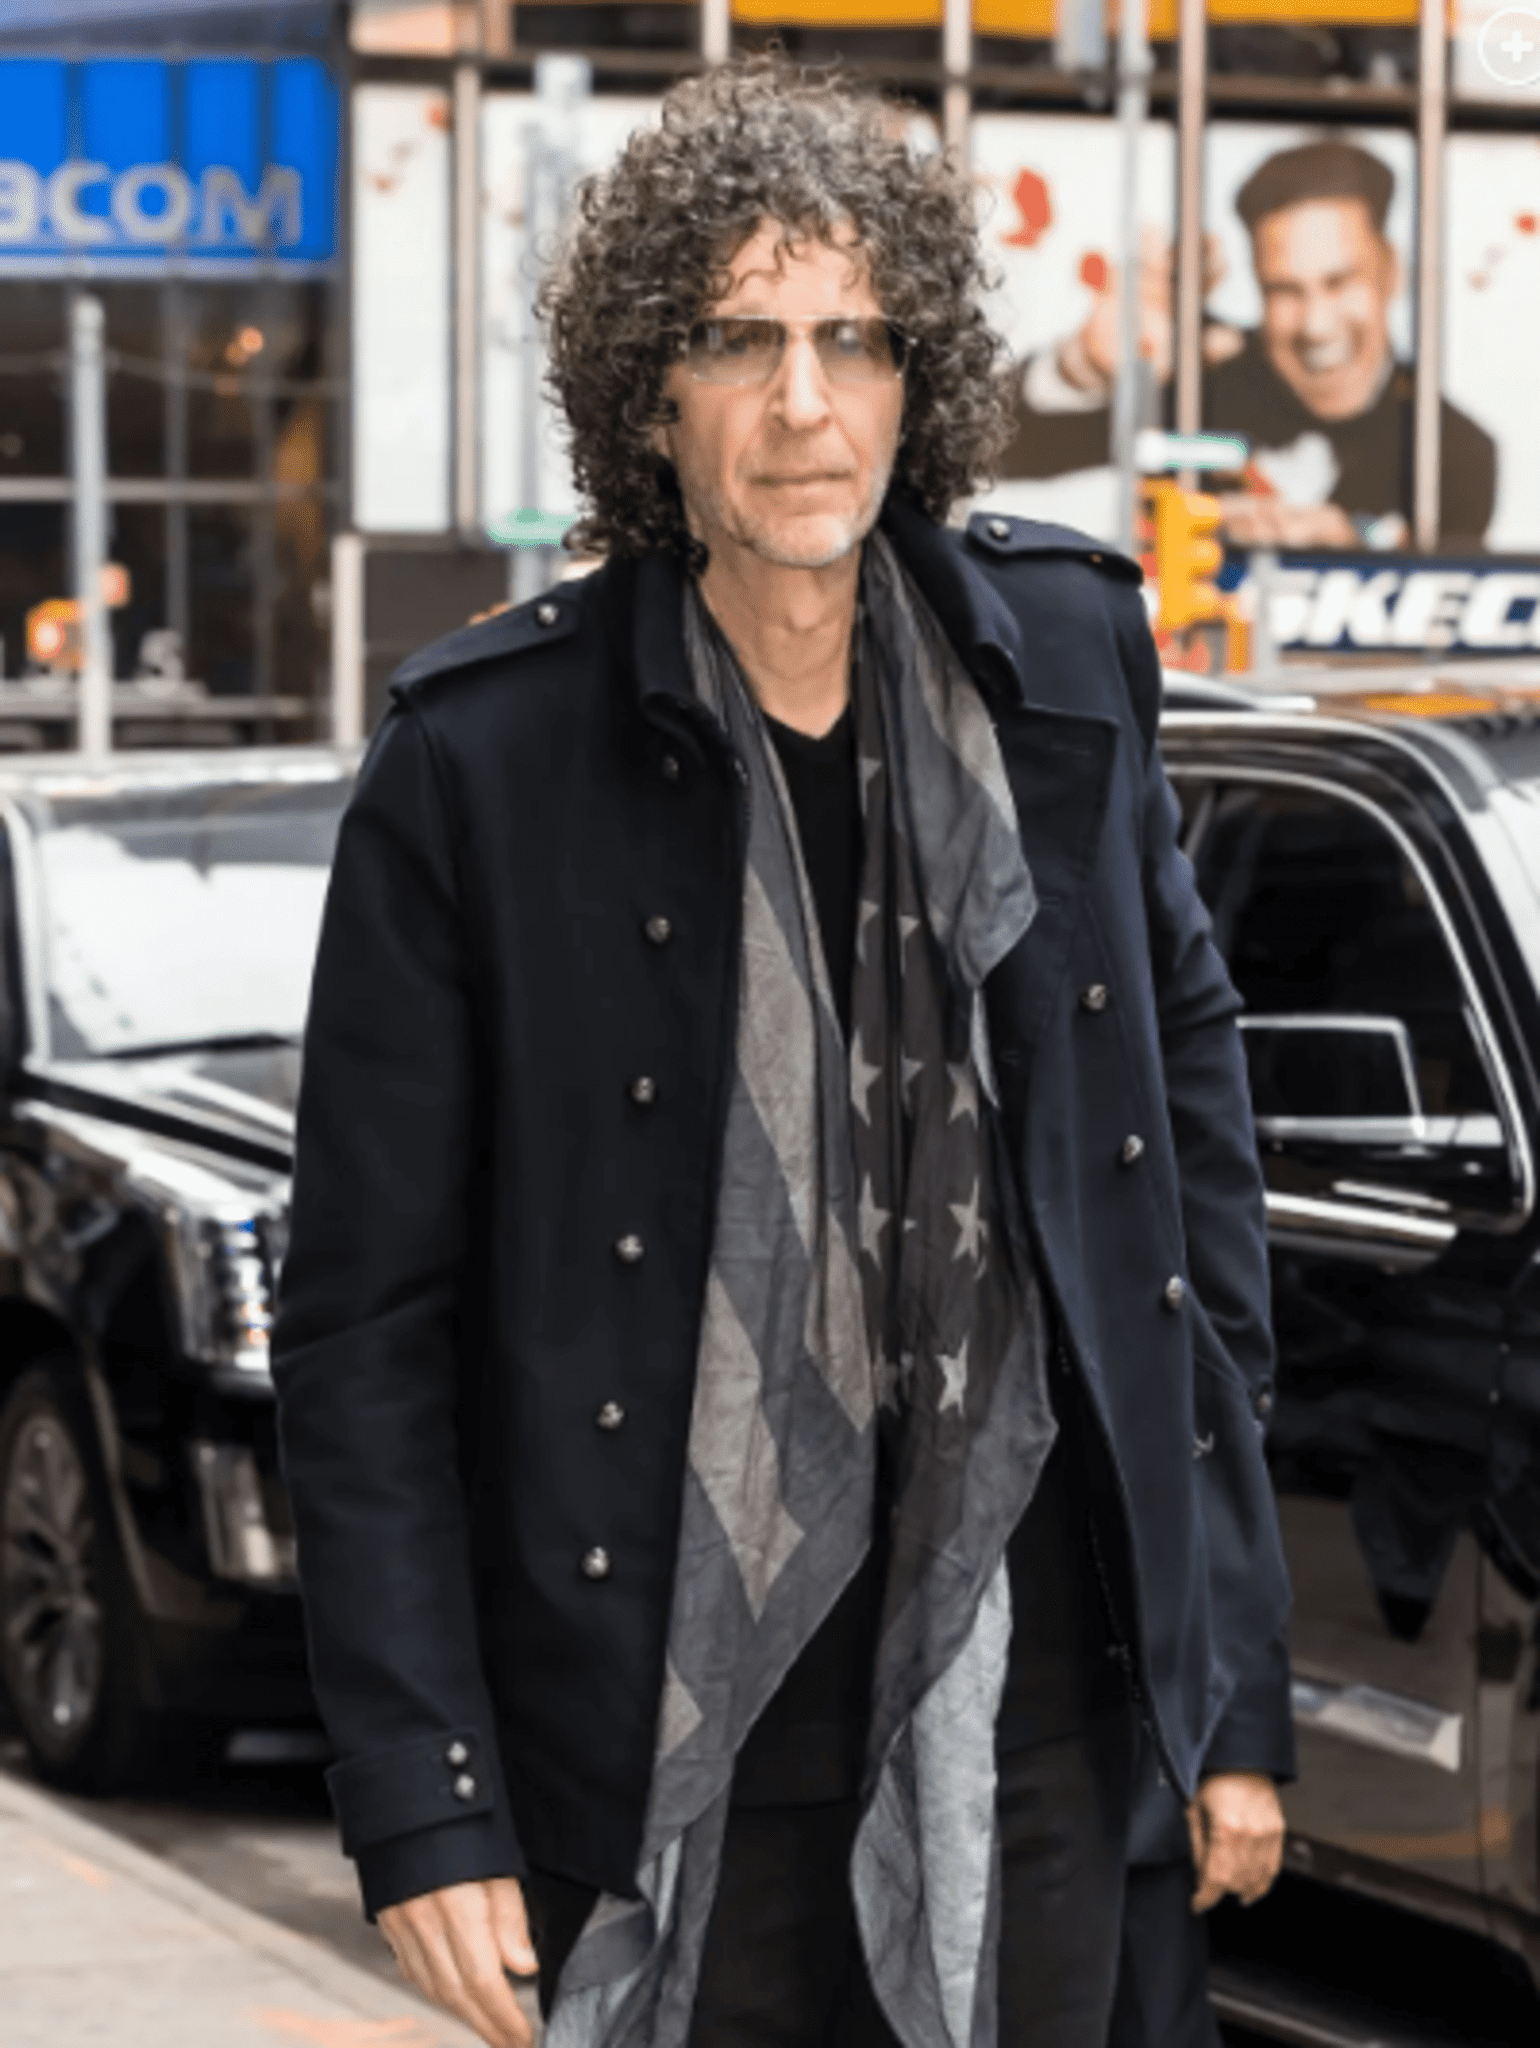 Queen Elizabeth II's death was widely covered in the United States, although Howard Stern was not pleased